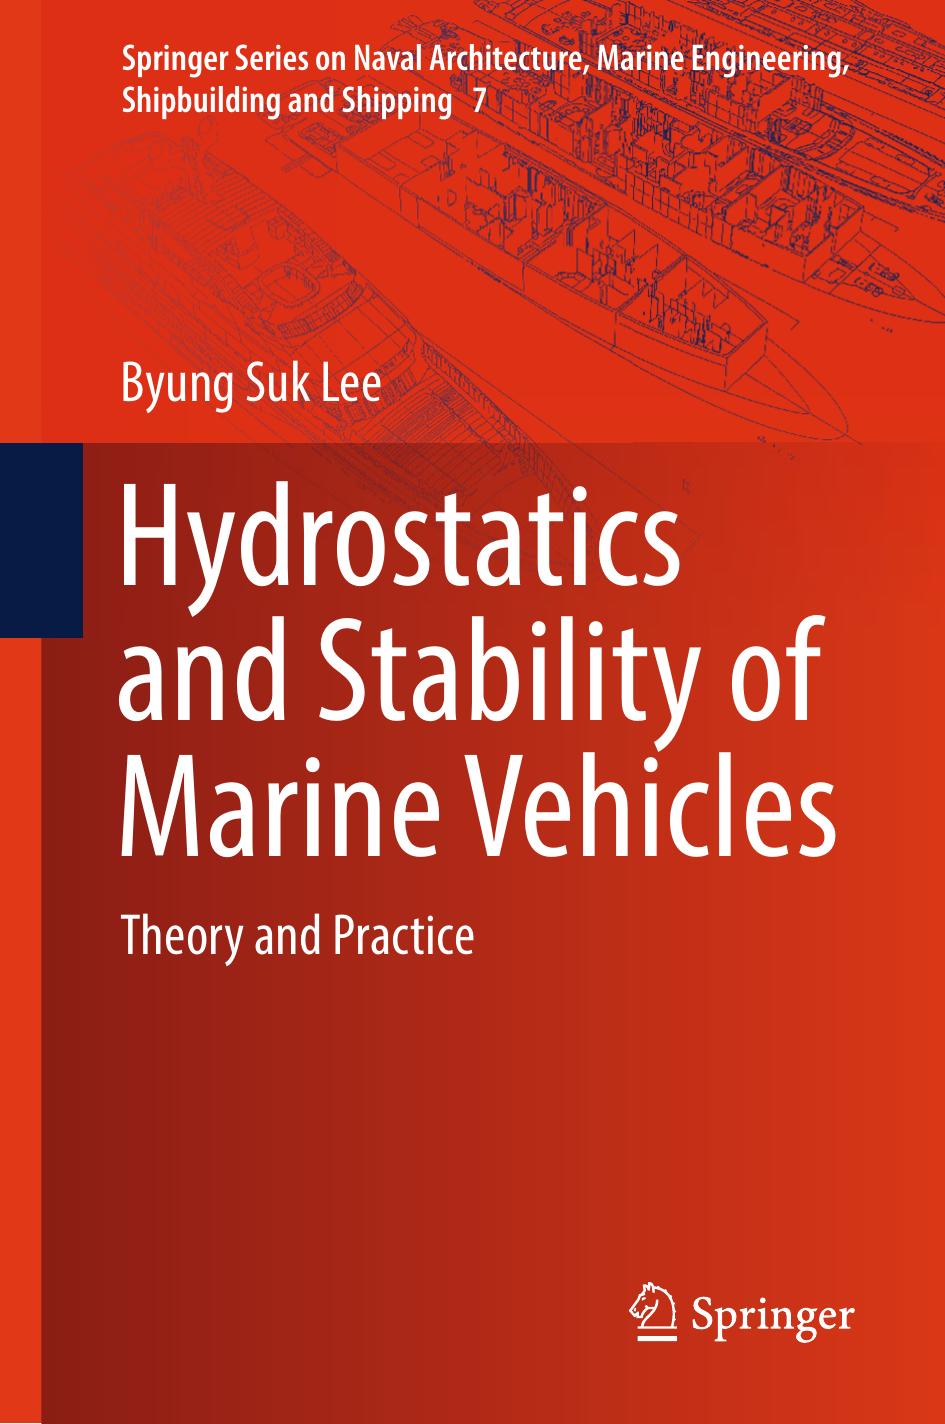 Hydrostatics and Stability of Marine Vehicles by Byung Suk Lee